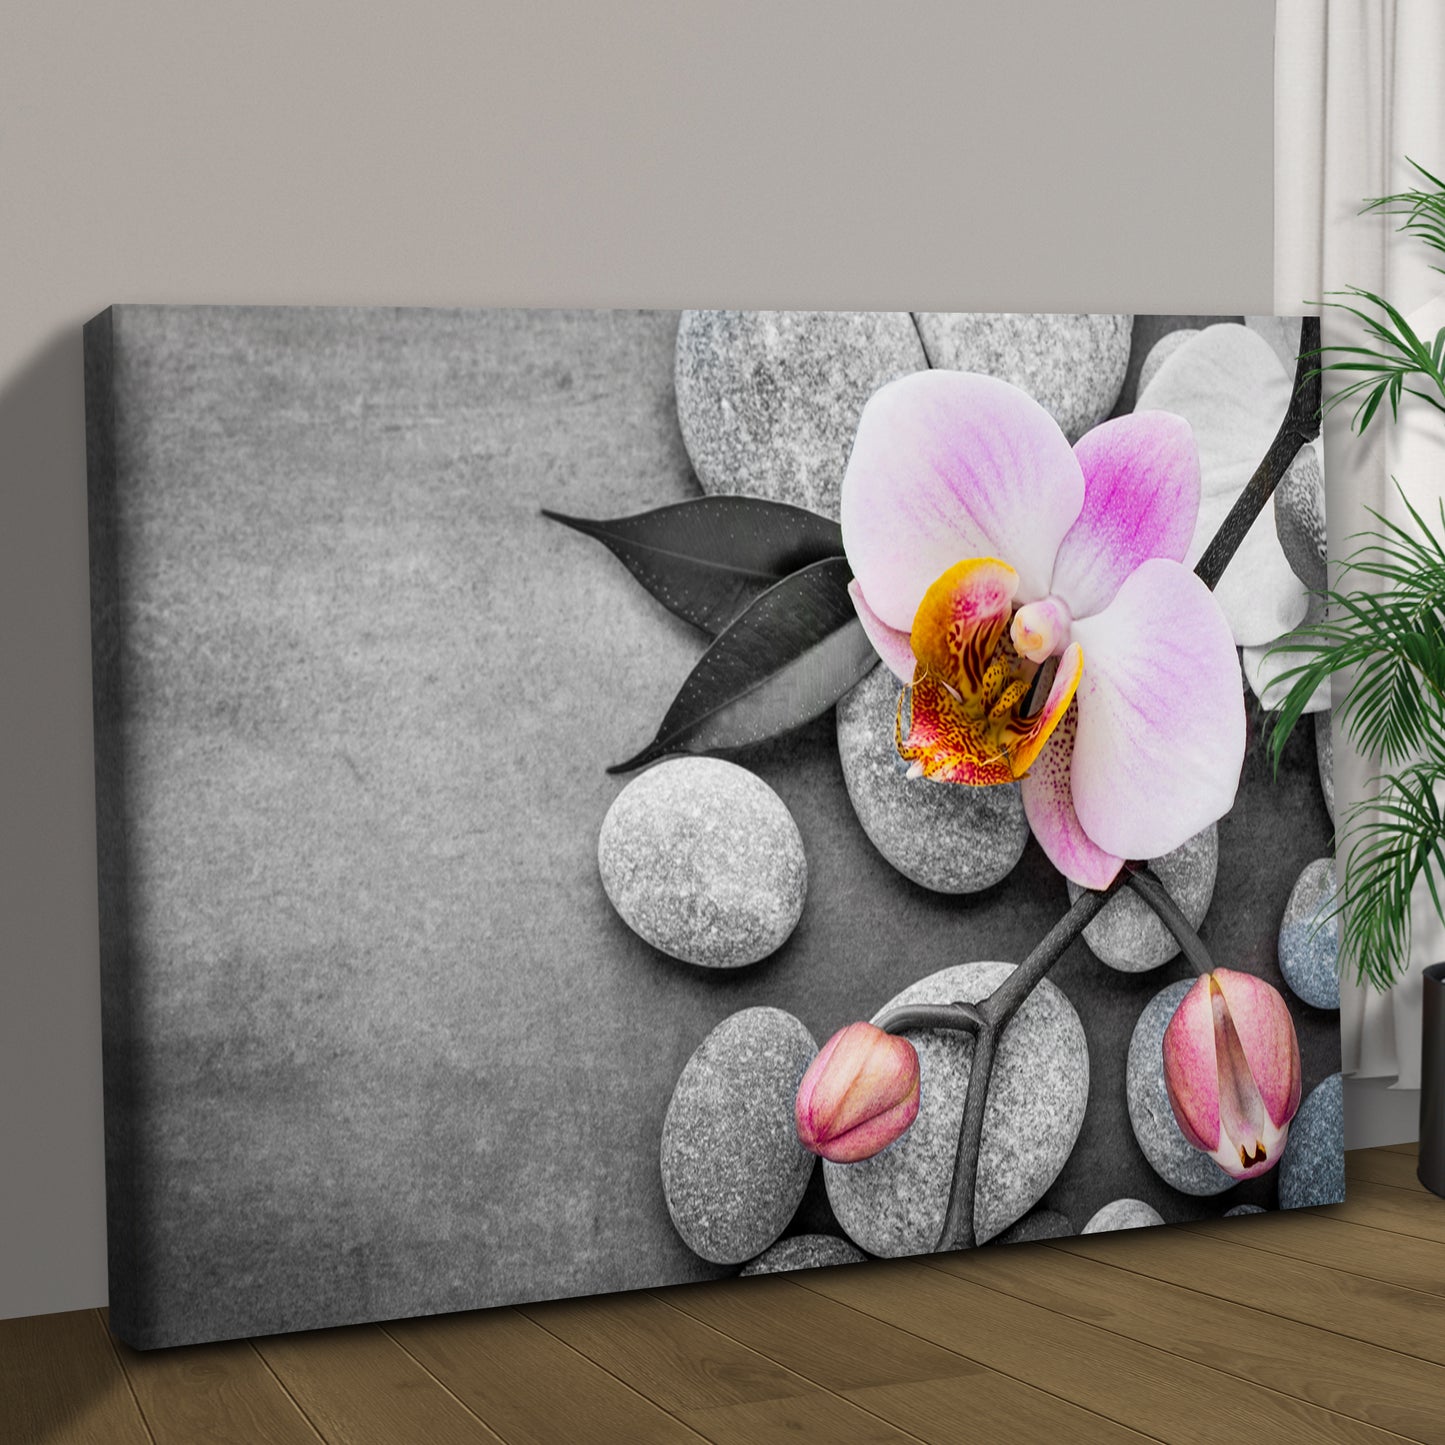 Fresh White Orchid Flower Canvas Wall Art Style 1 - Image by Tailored Canvases